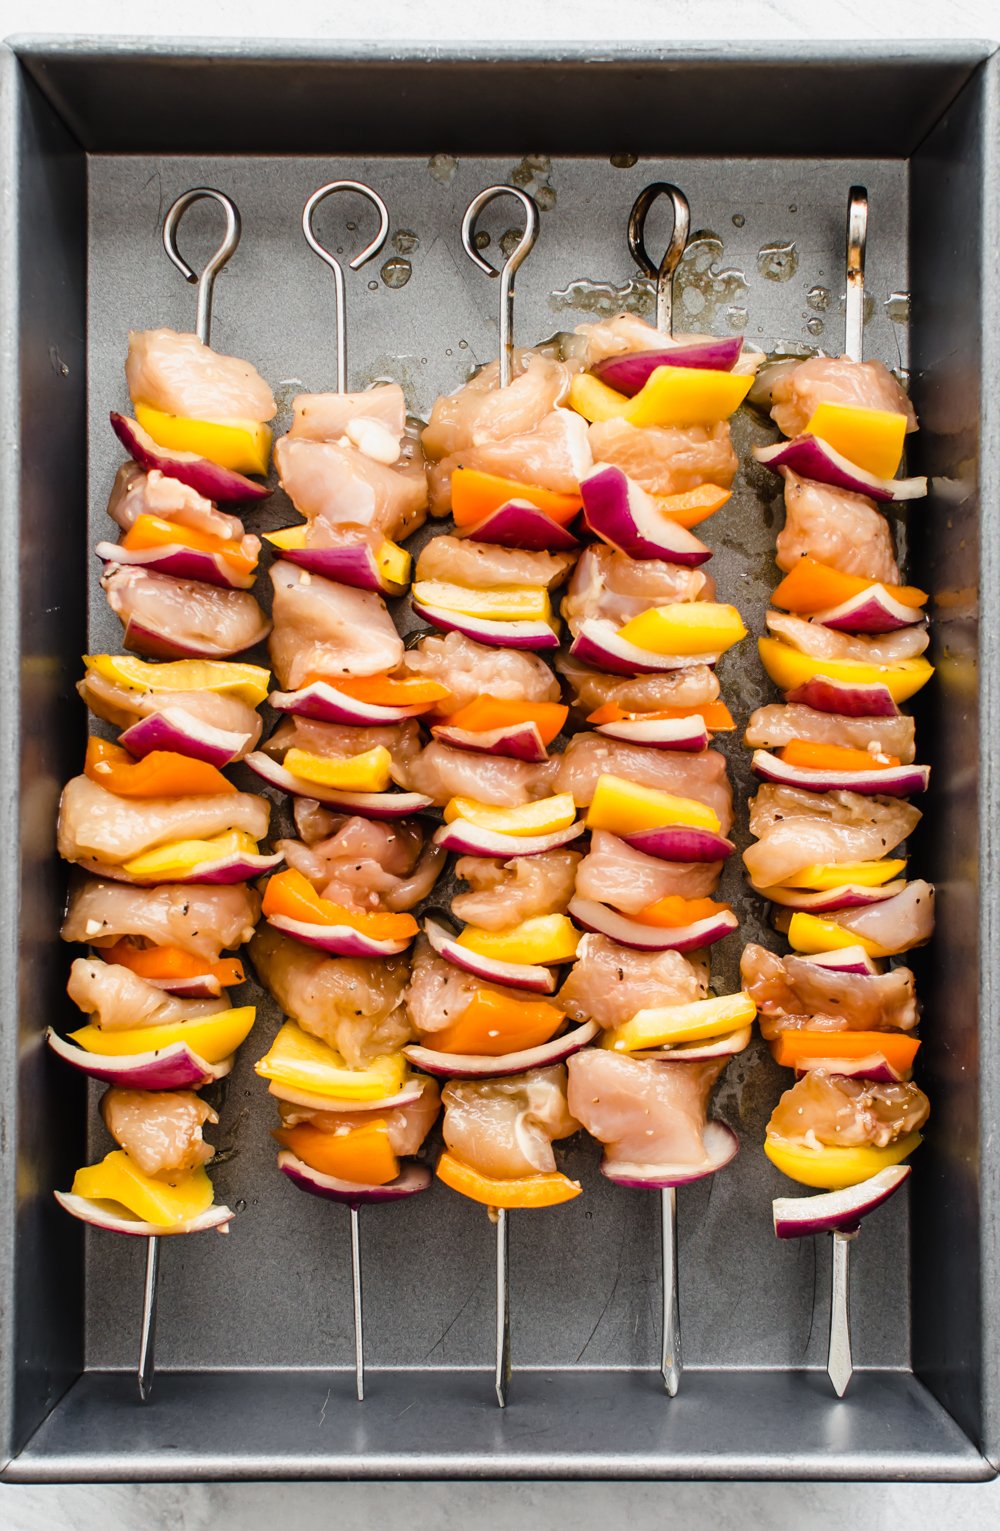 Raw chicken and veggies on skewers in a pan ready for the grill.